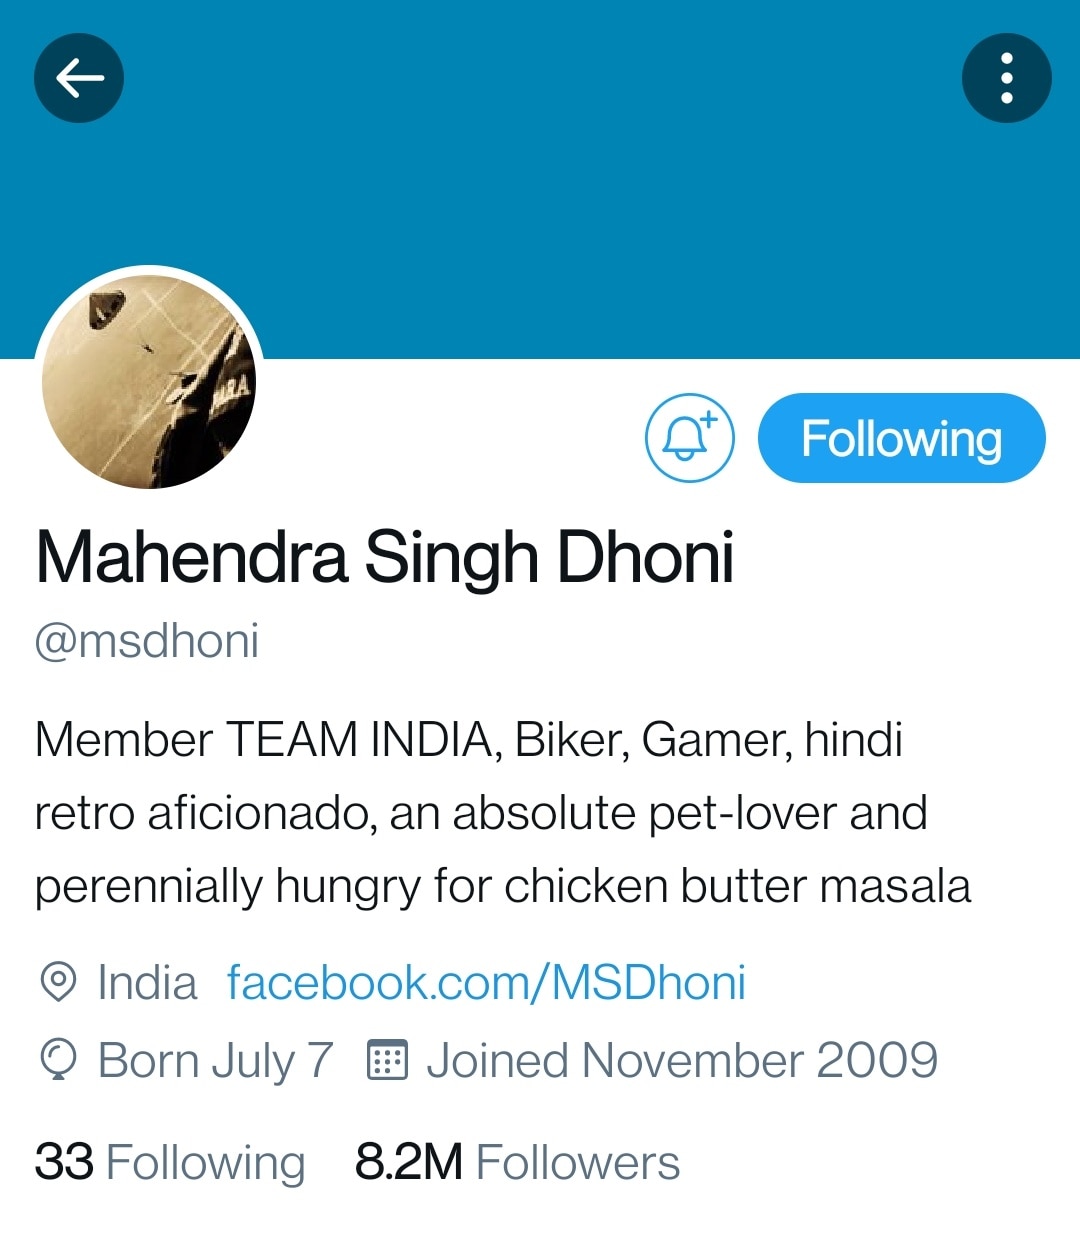 Thala Loses Blue Tick: MS Dhoni's Twitter Account With 8.2 Million Followers Gets Unverified